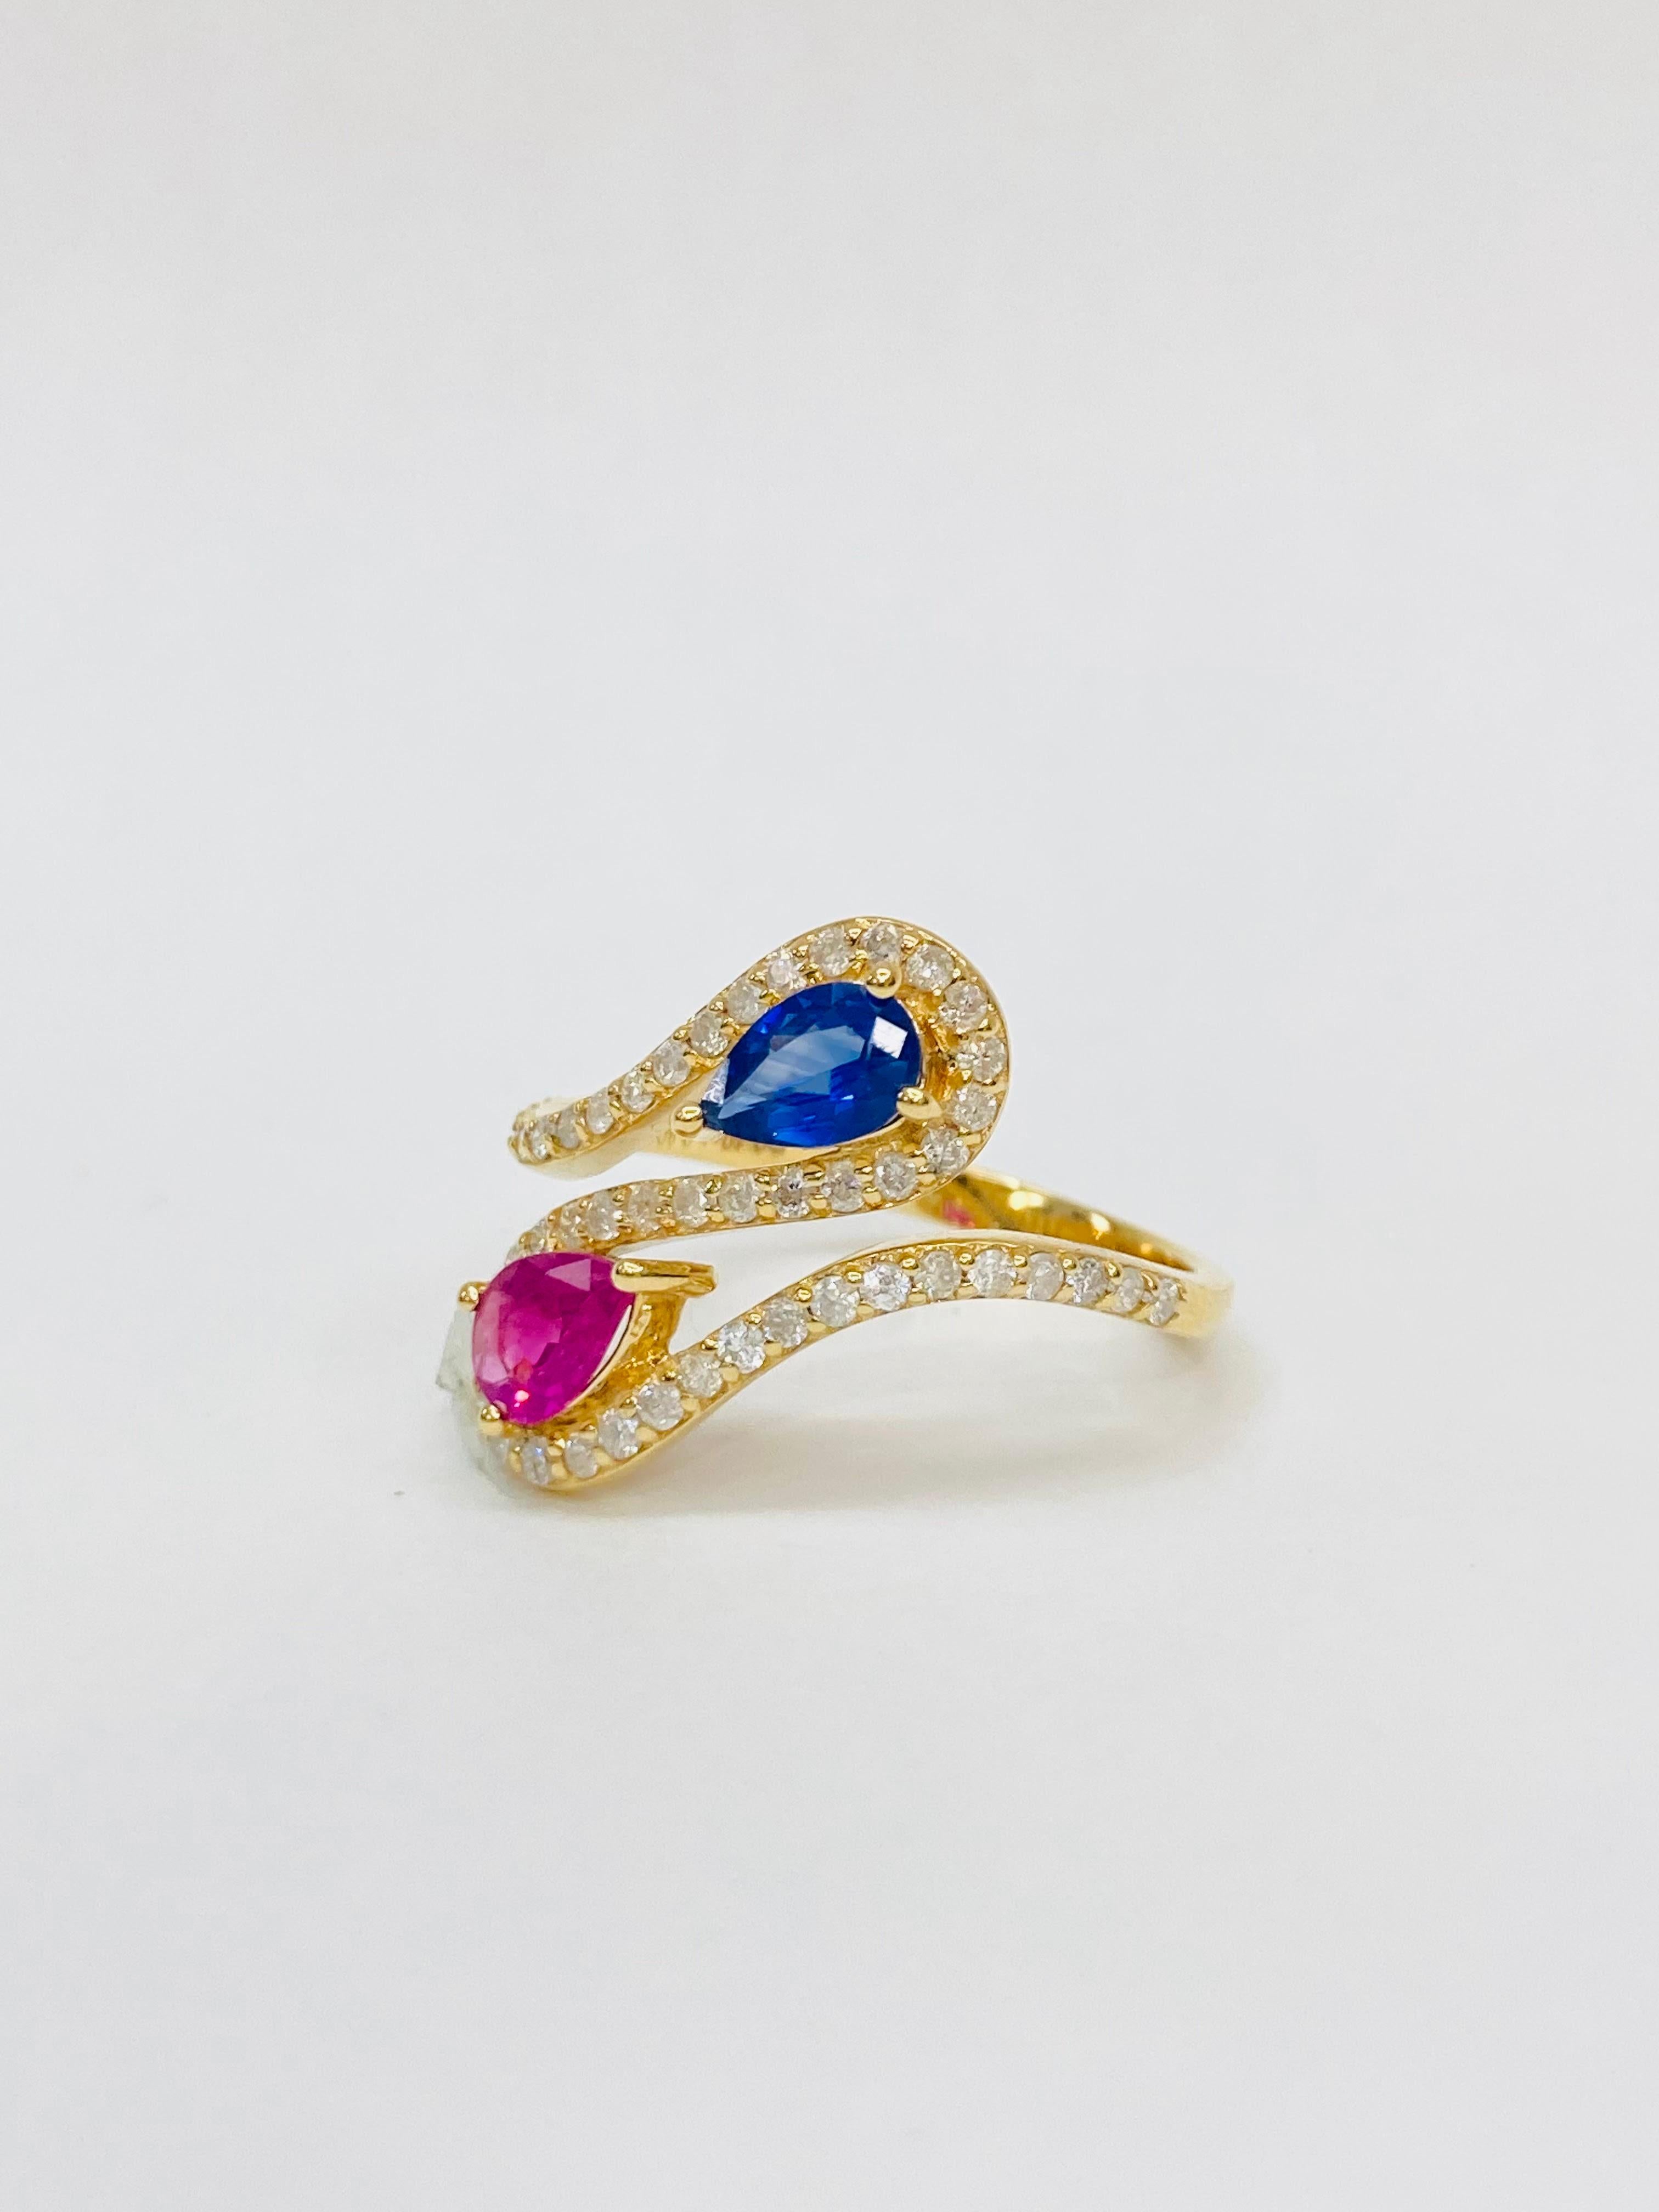 Bochic 2 Color “Retro Vintage” Ruby & Sapphire 18K Gold & Diamond Cluster Ring.

Natural Red Ruby Pear Shape 0.40 Carat 
Natural Blue Sapphire Shape  0.40 Carat 
Diamonds 0.45 Carat 
F color 
VS clarity 
18K Yellow Gold
5.10 Gram

This Ring is from